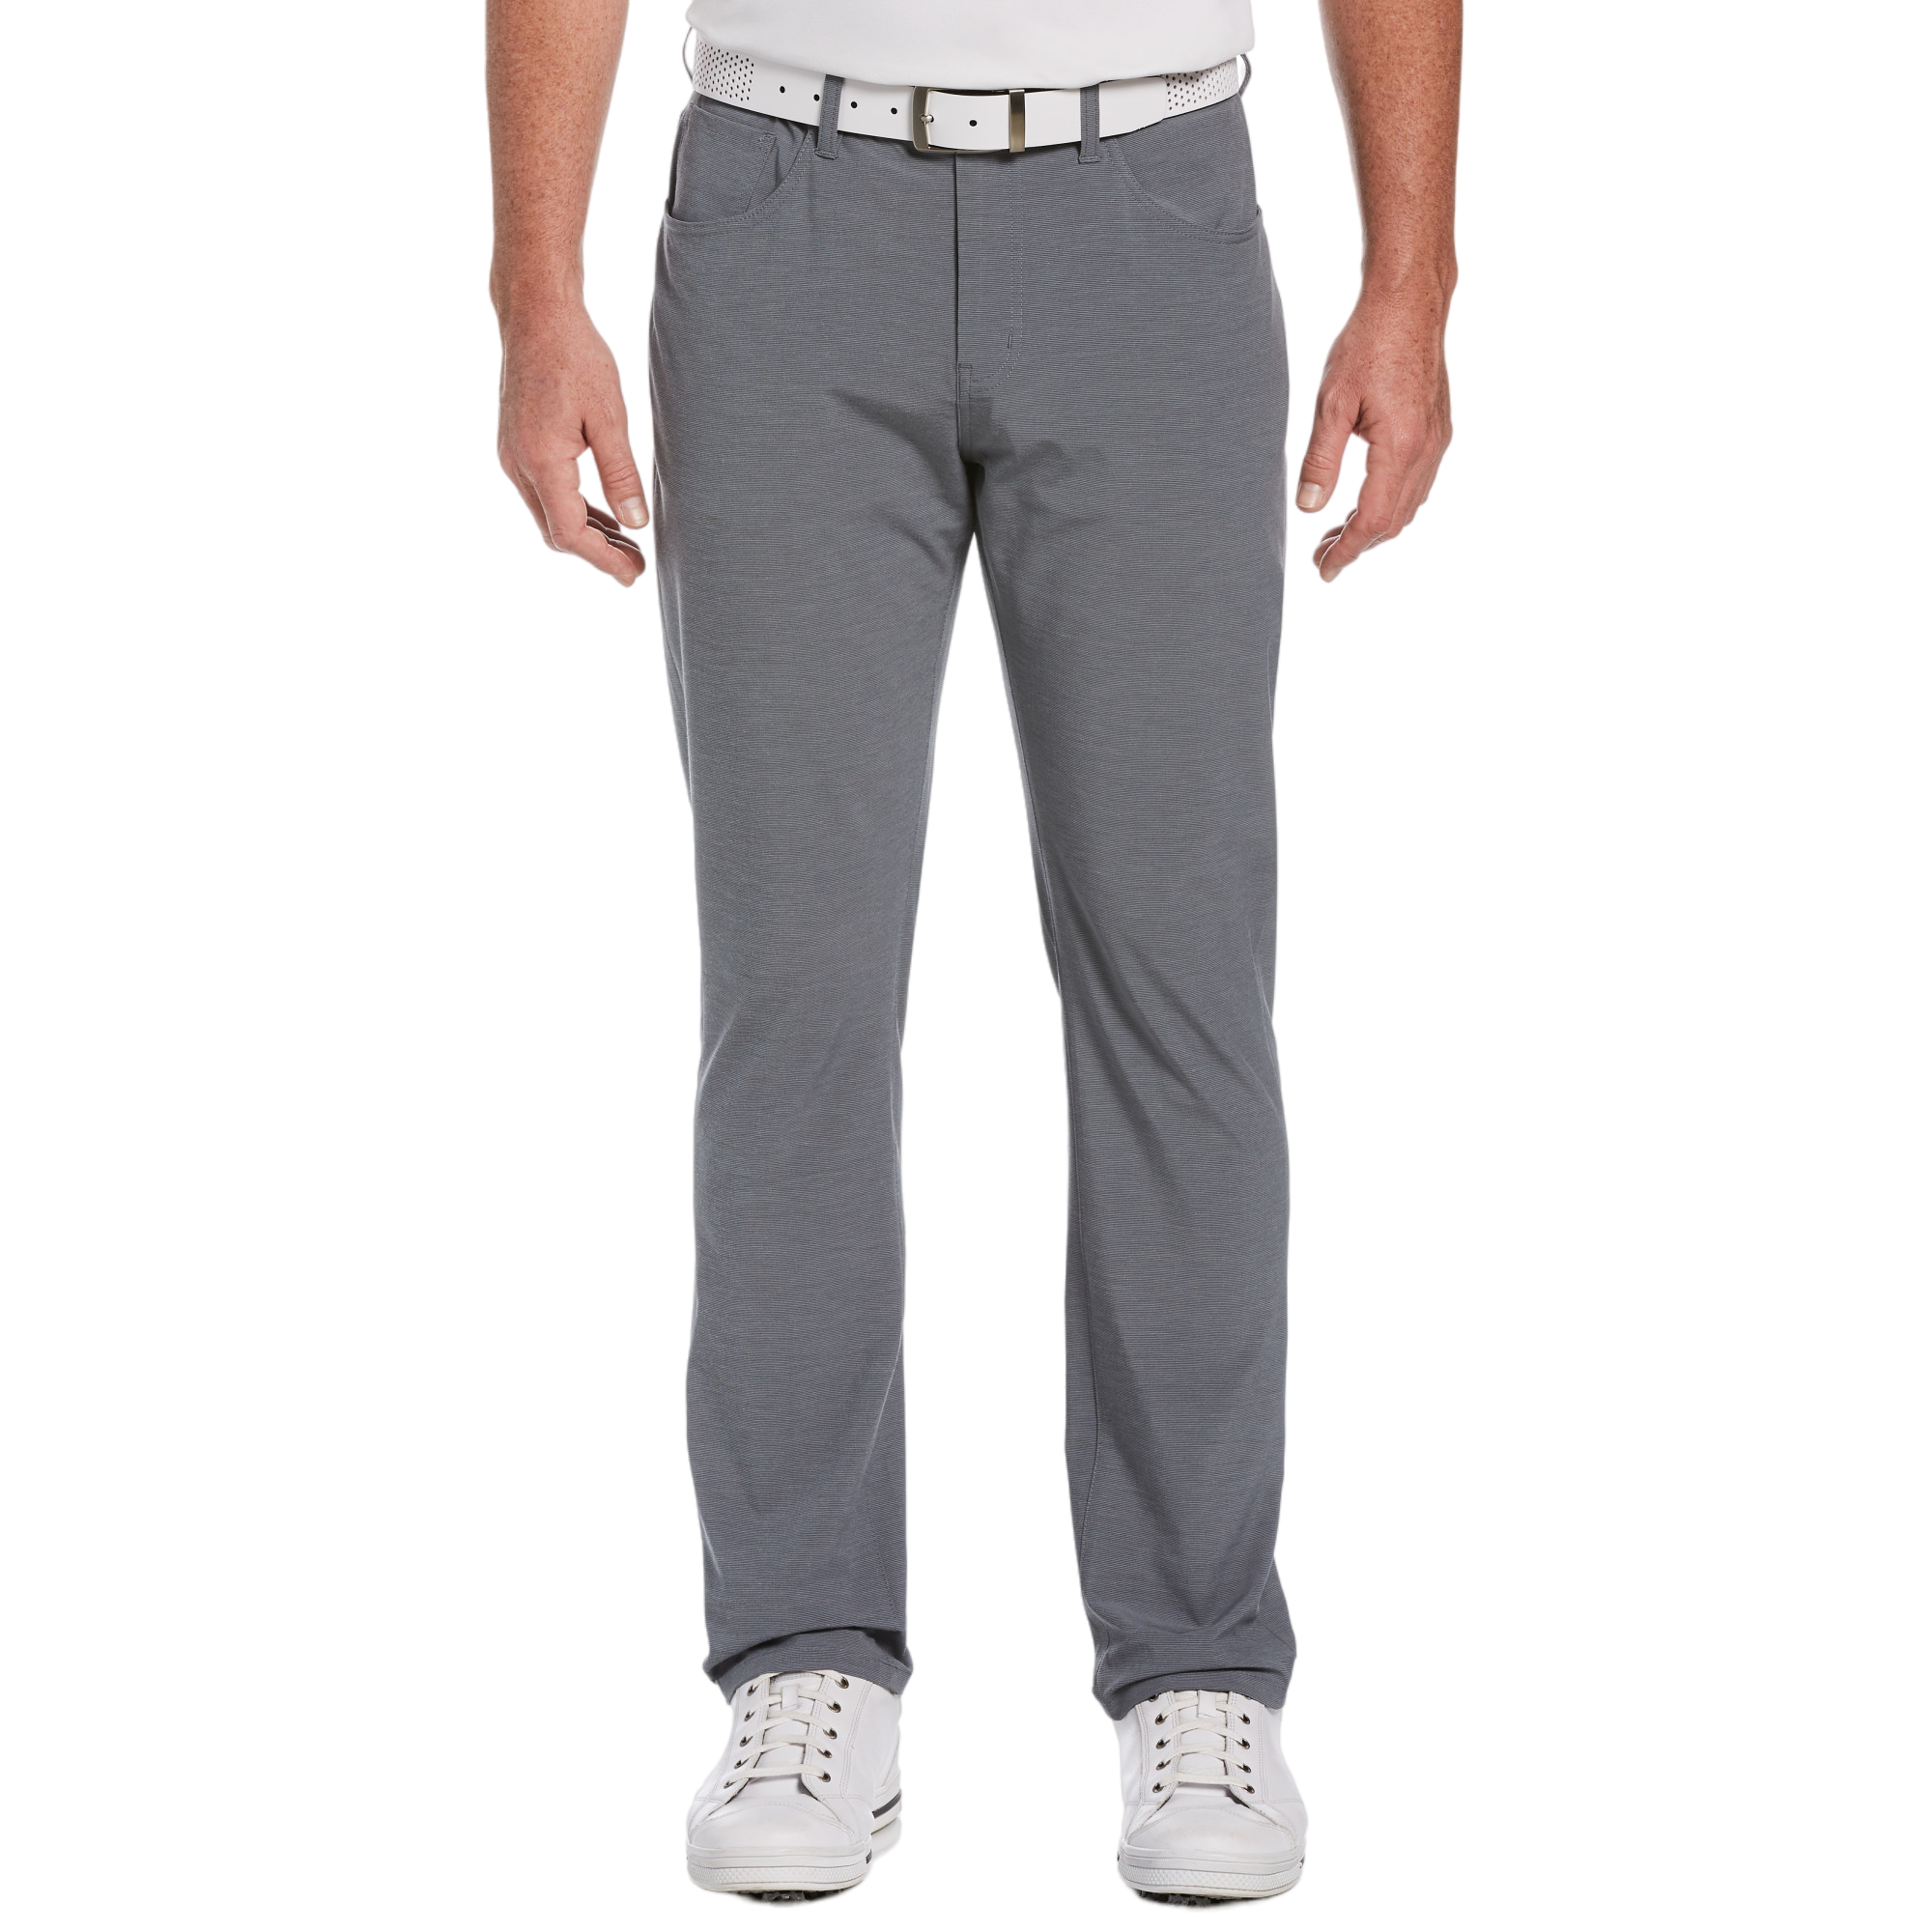 The best golf pants according to your favorite golf shorts style, Golf  Equipment: Clubs, Balls, Bags